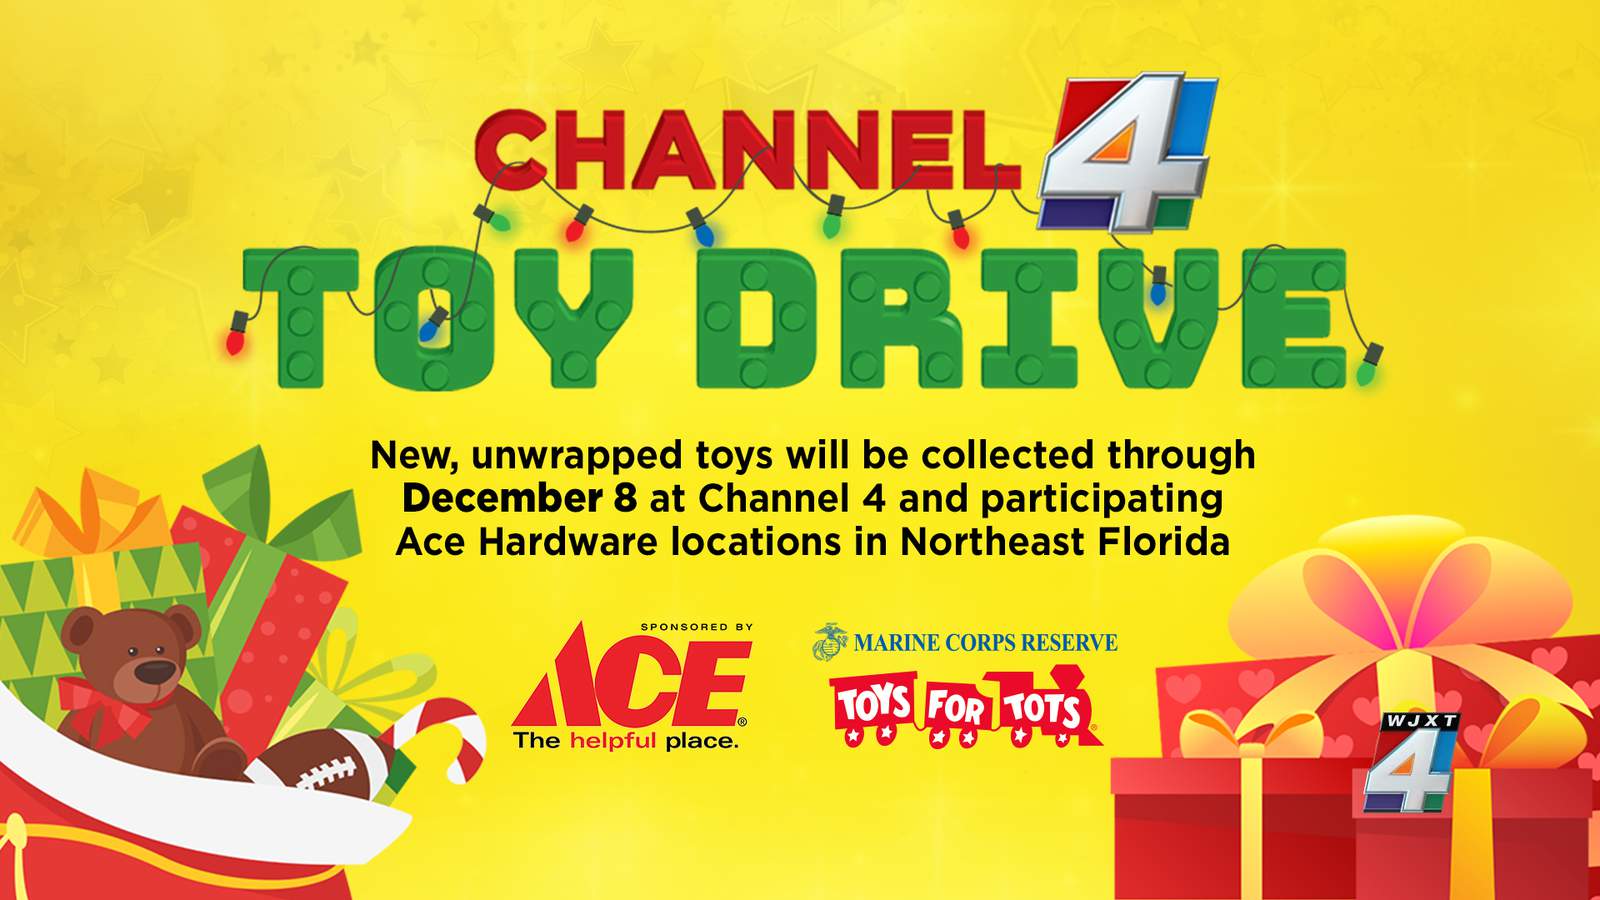 Spread some holiday cheer: Donate to Toys for Tots